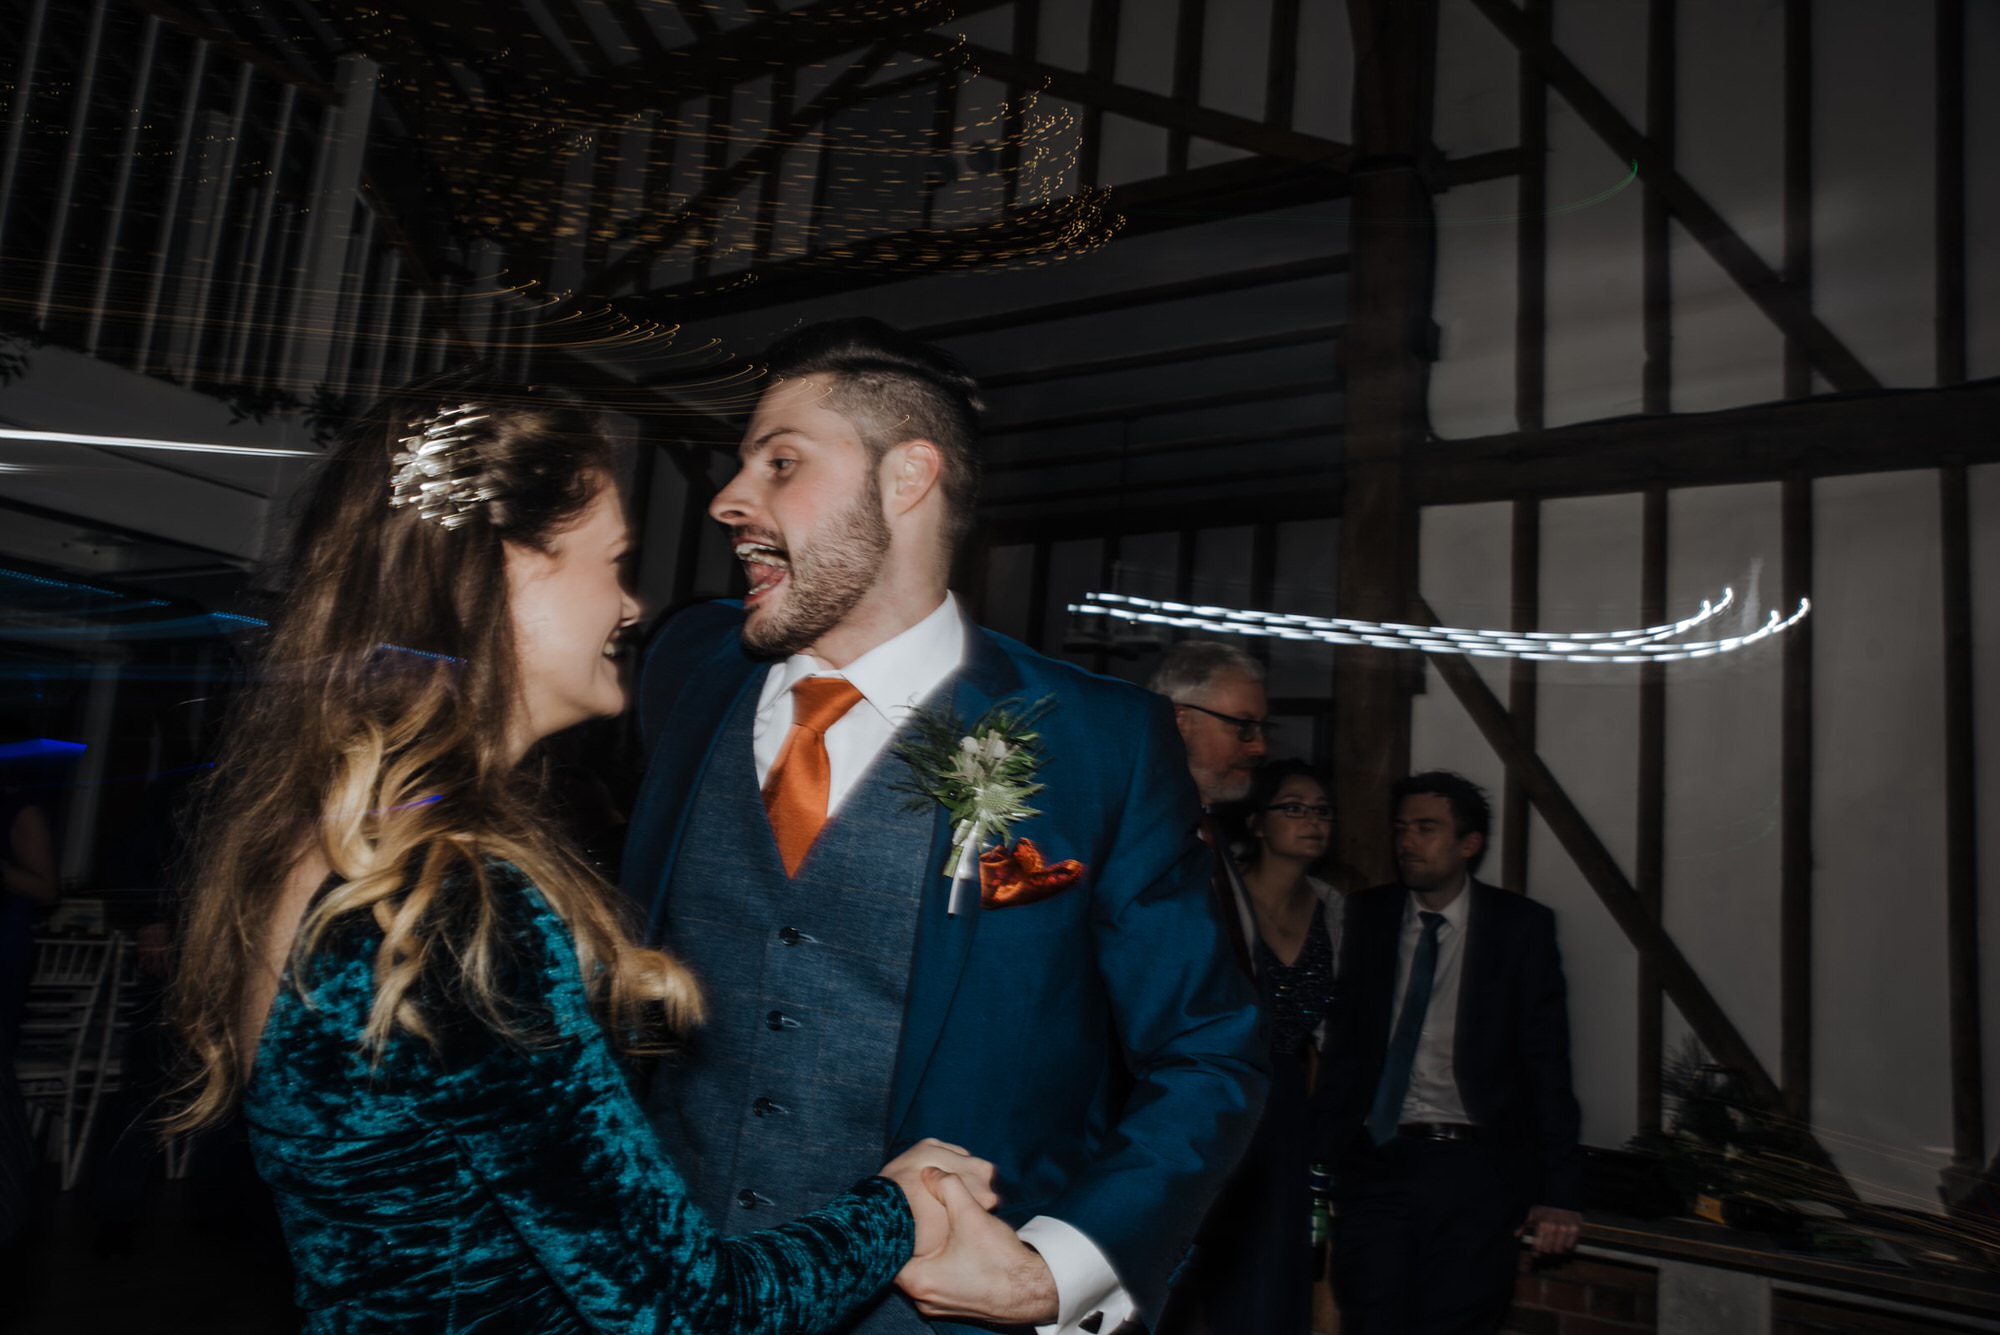 Dancing guests and bride and groom at the reception Roshni photography The Milling Barn, Bluntswood Hall, Throcking wedding photographer